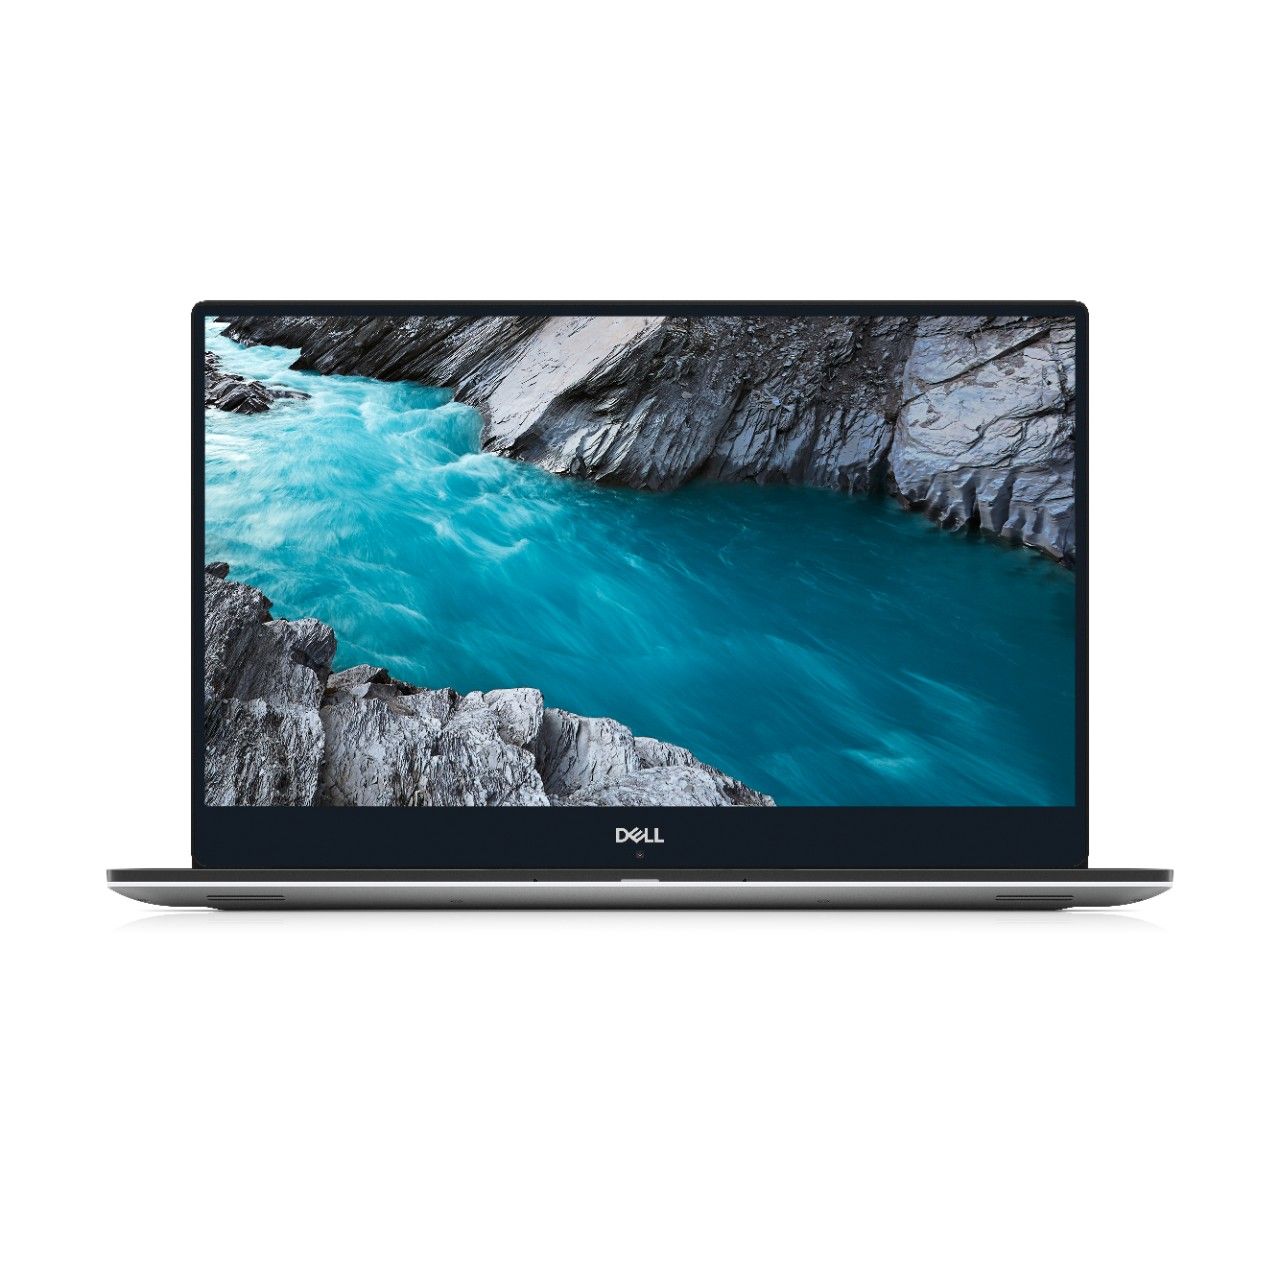 DELL Inspiron 15-XPS-1294 Laptop i7-79750H/32GB/1TB SSD/NVIDIA GeForce RTX 1650 4GB/15.6-inch 4K UHD/60Hz Refresh Rate/Windows 10/Silver